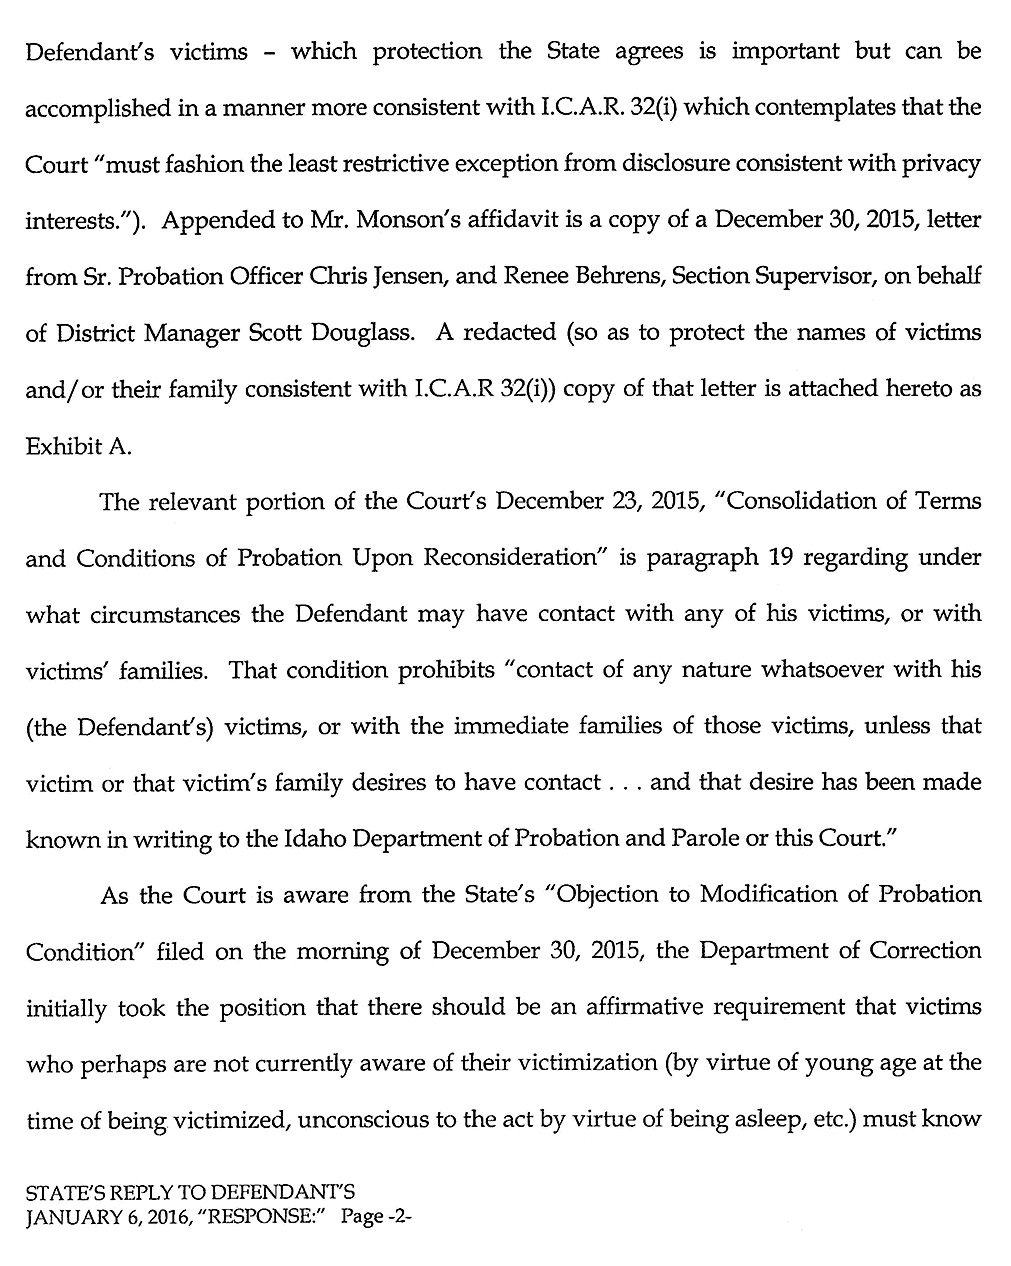 State’s Reply to Defendant’s January 6, 2016, “Response” page 2